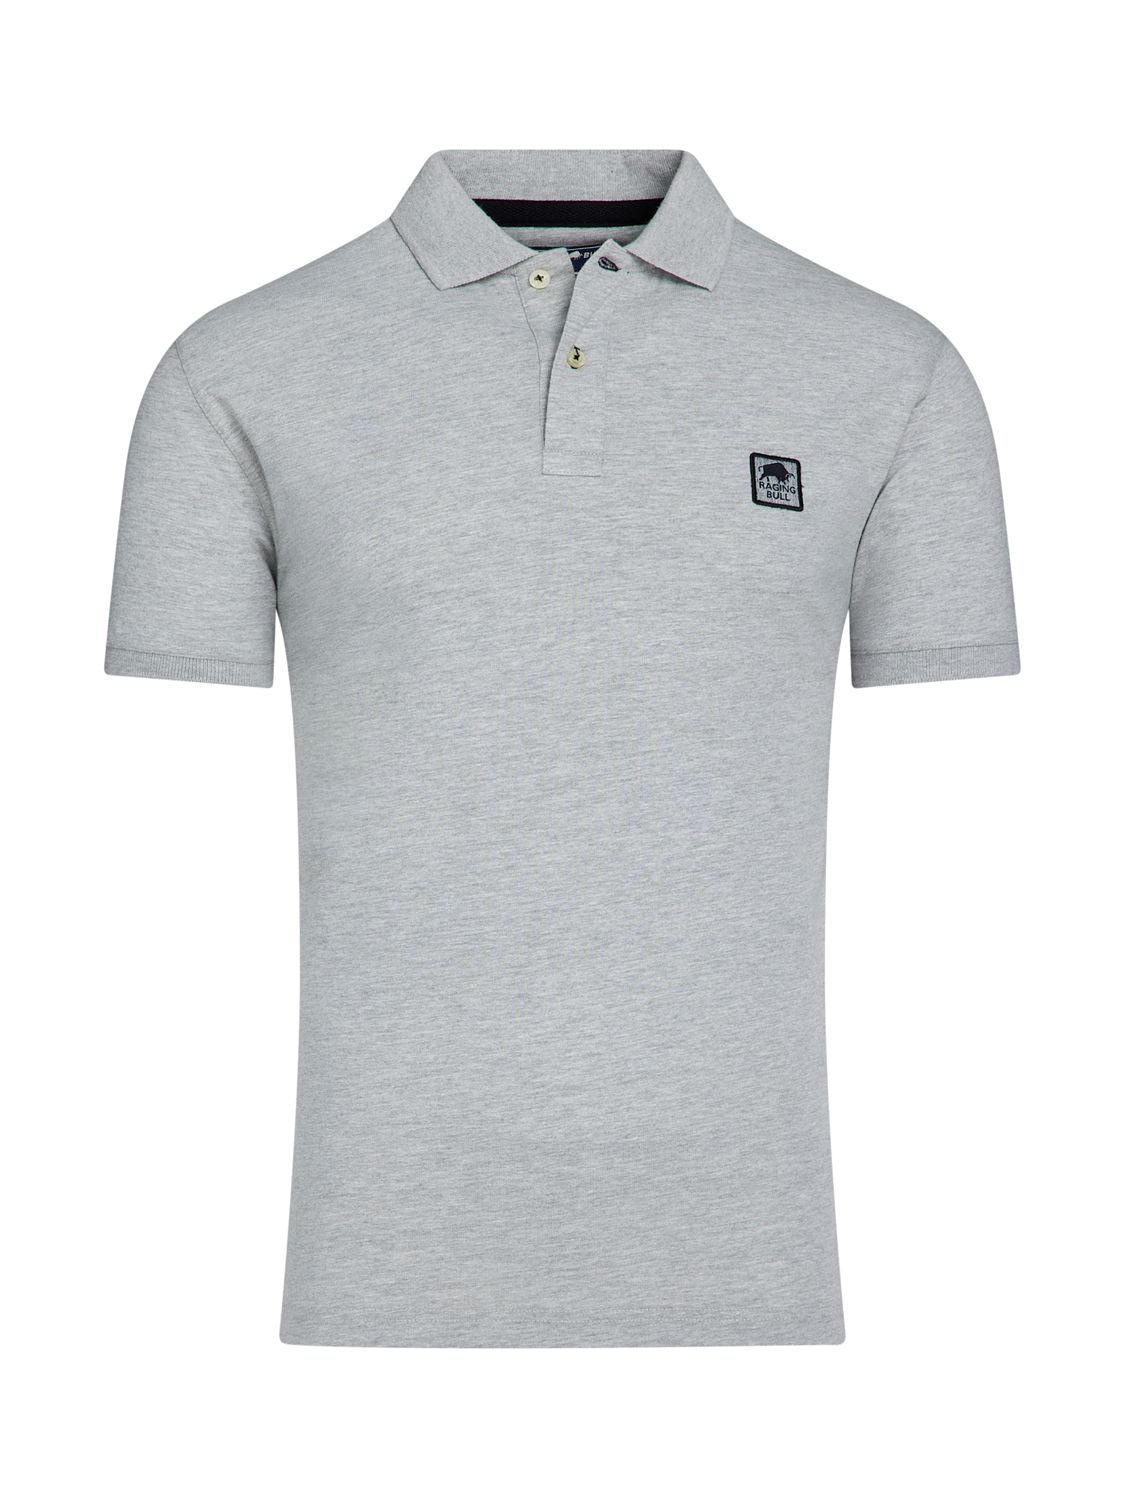 Raging Bull Patch Jersey Polo Shirt, Grey Marl, S